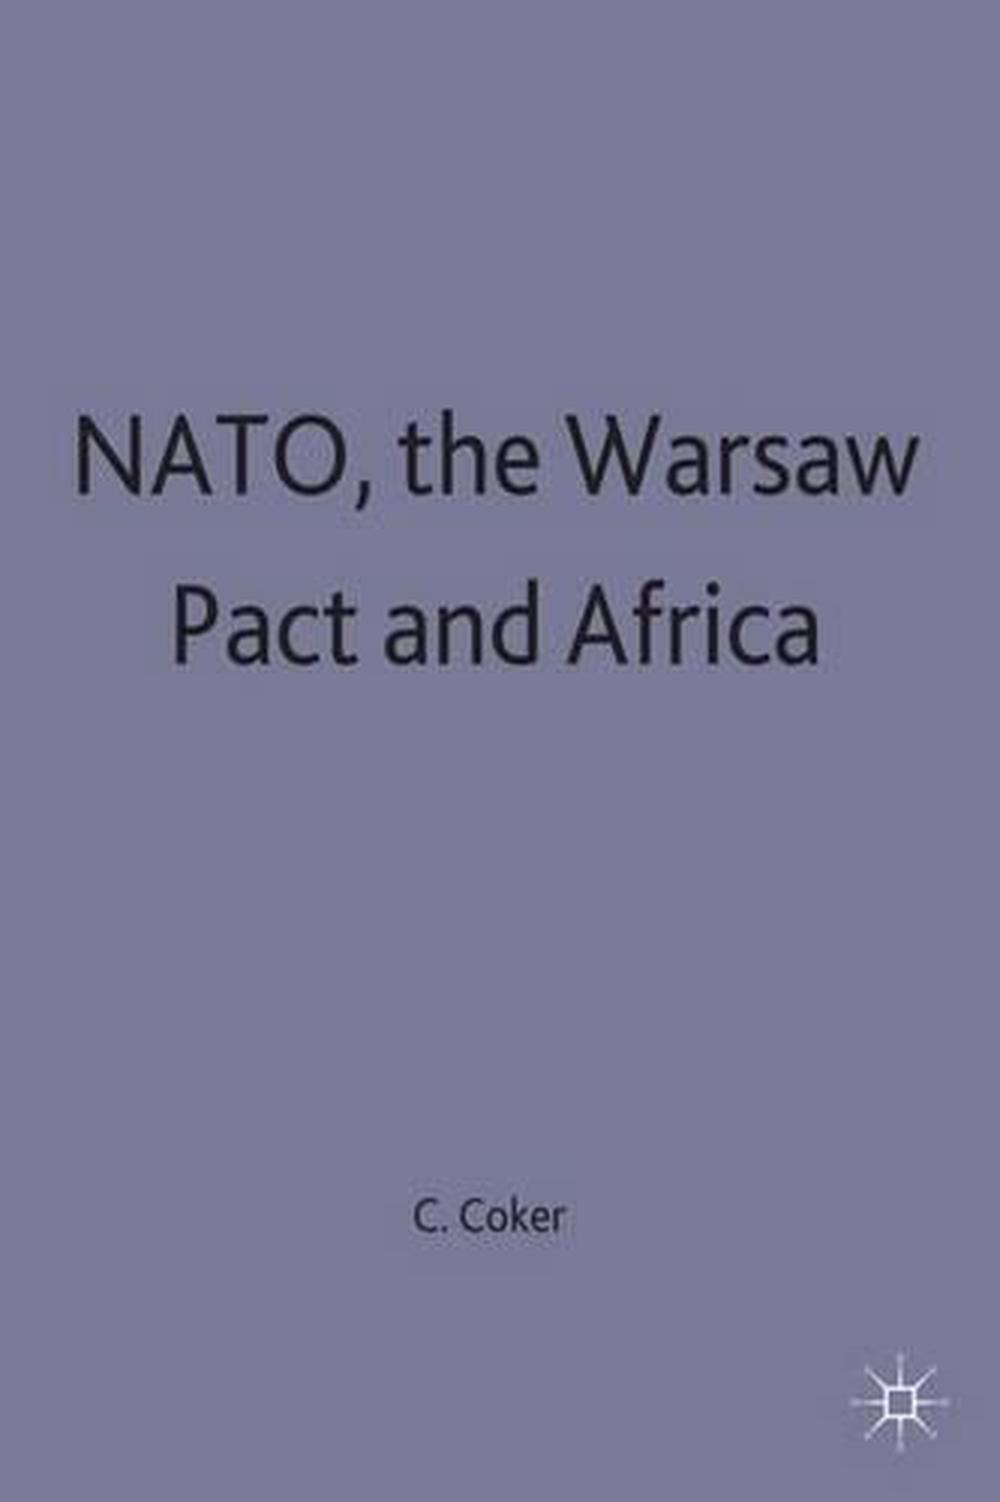 Warsaw pact date